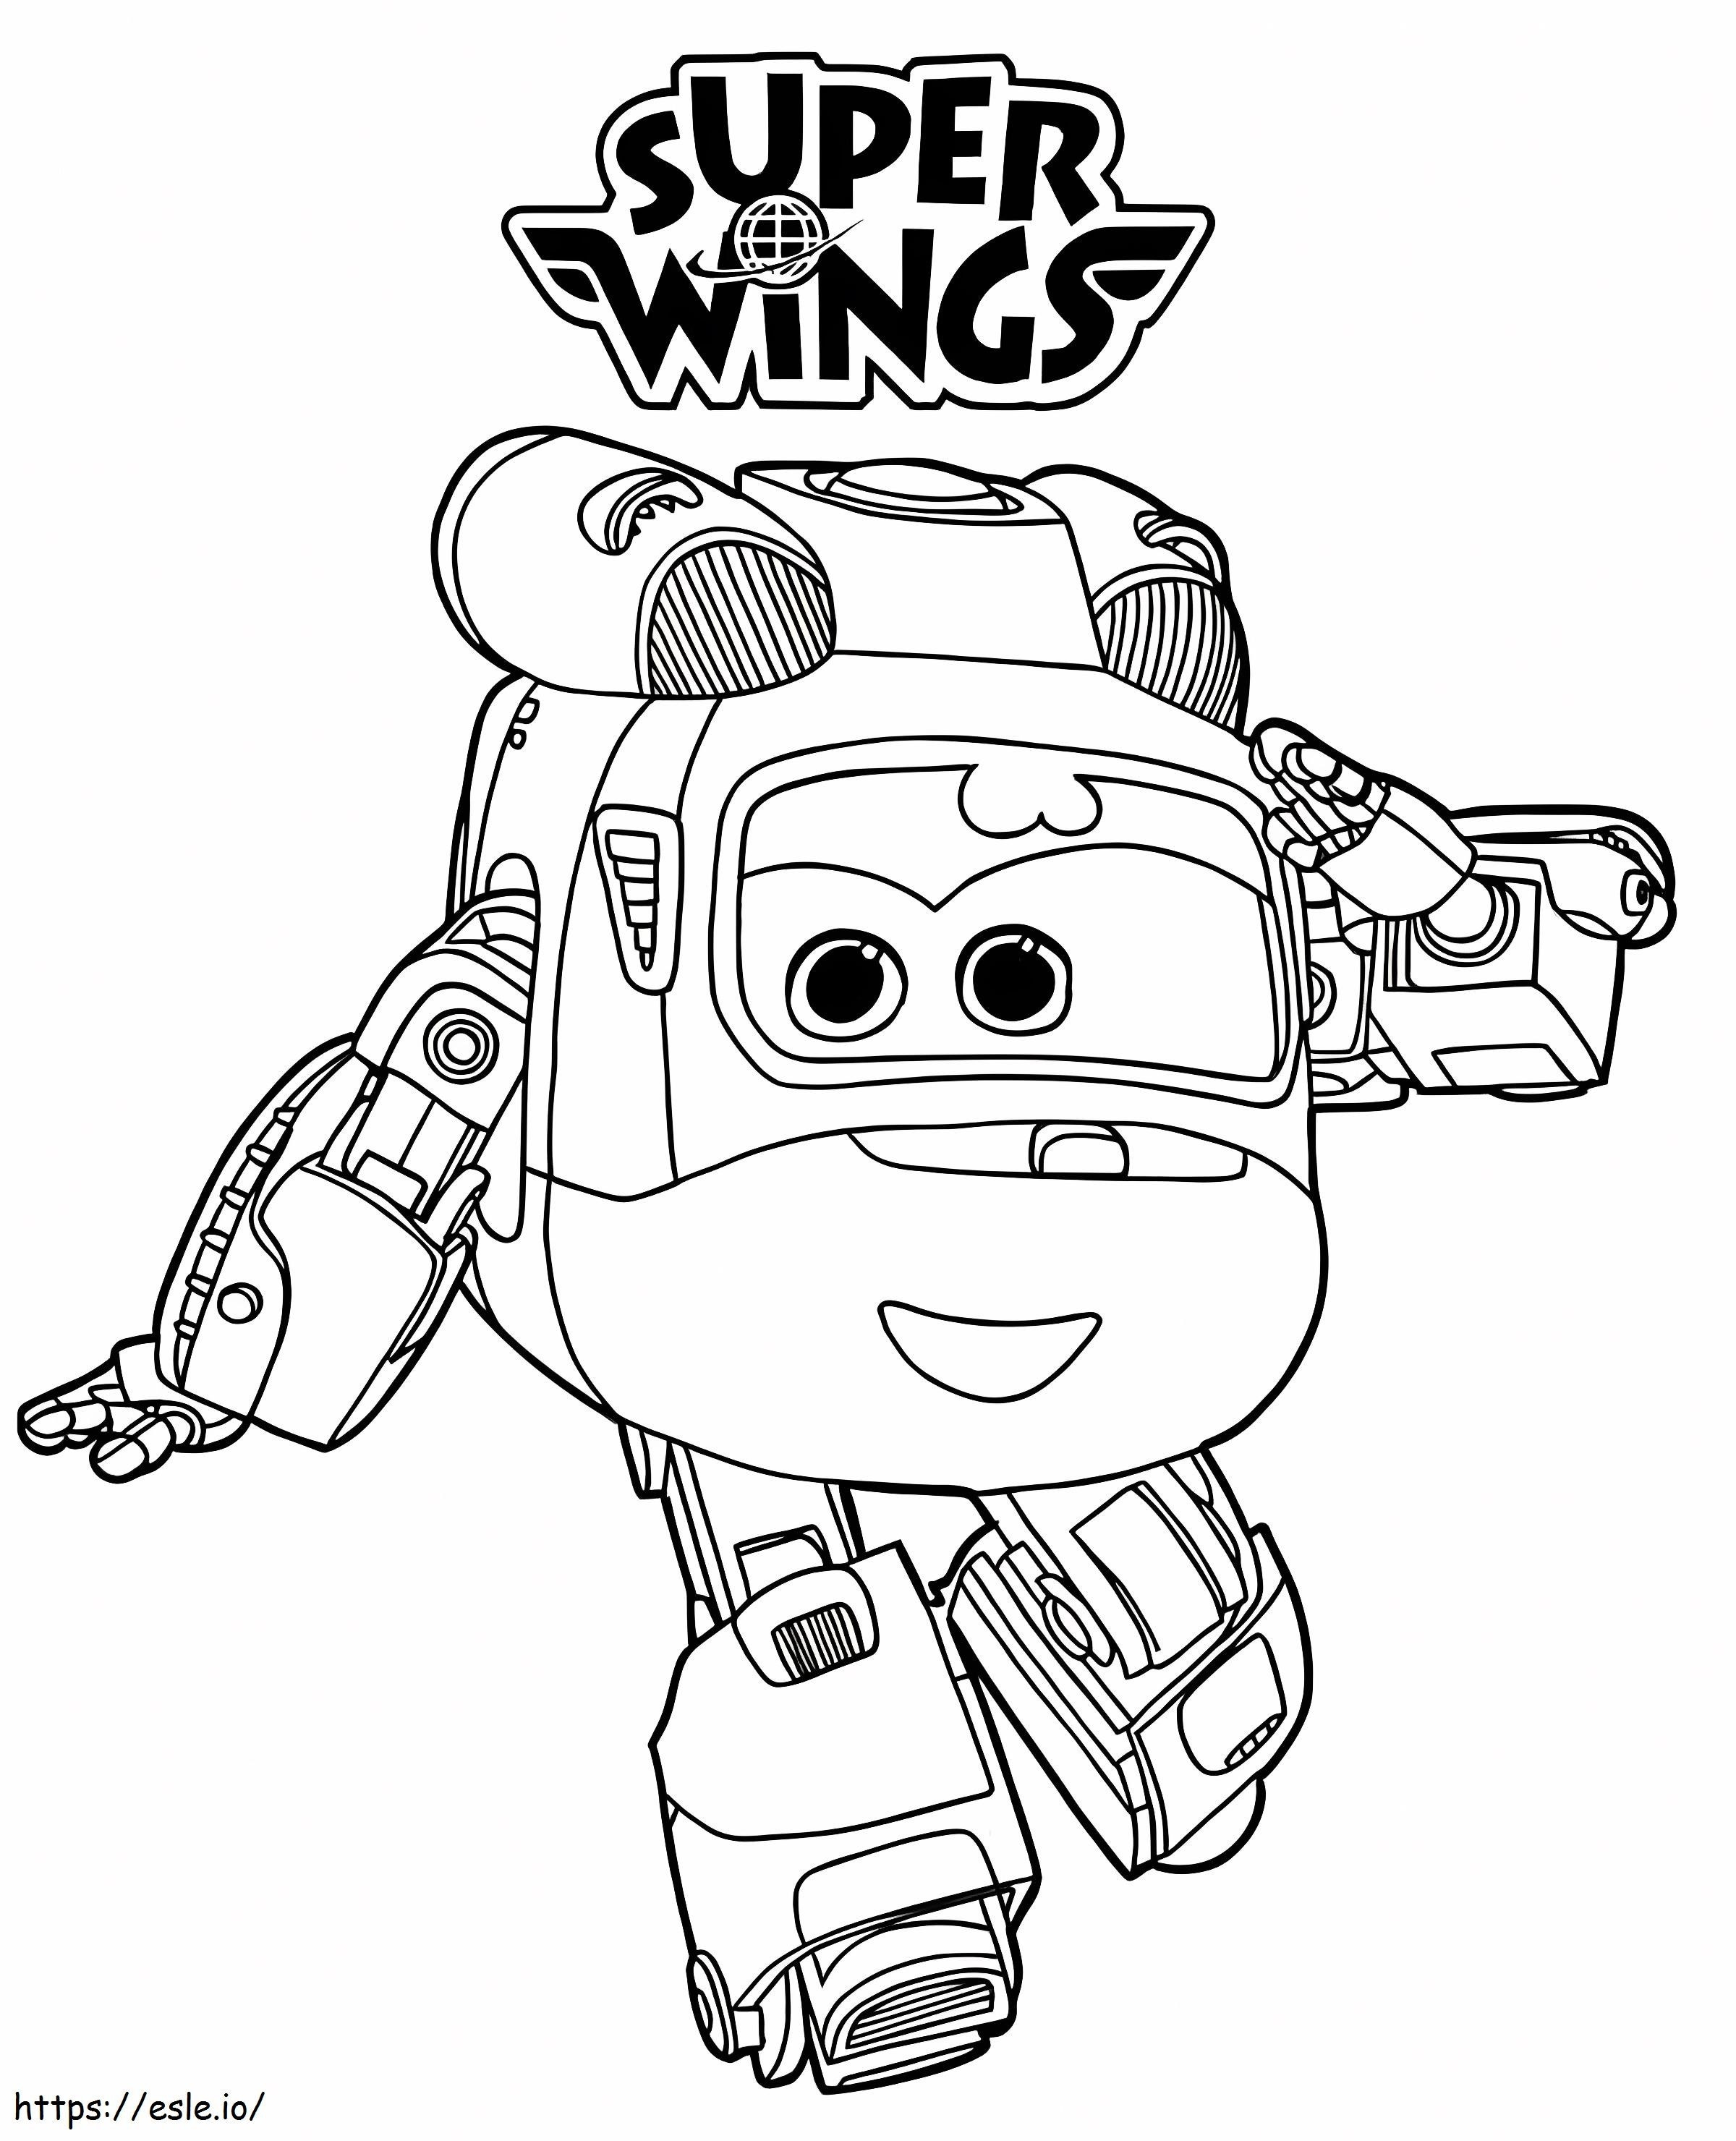 Dizzy Super Wings Fun coloring page